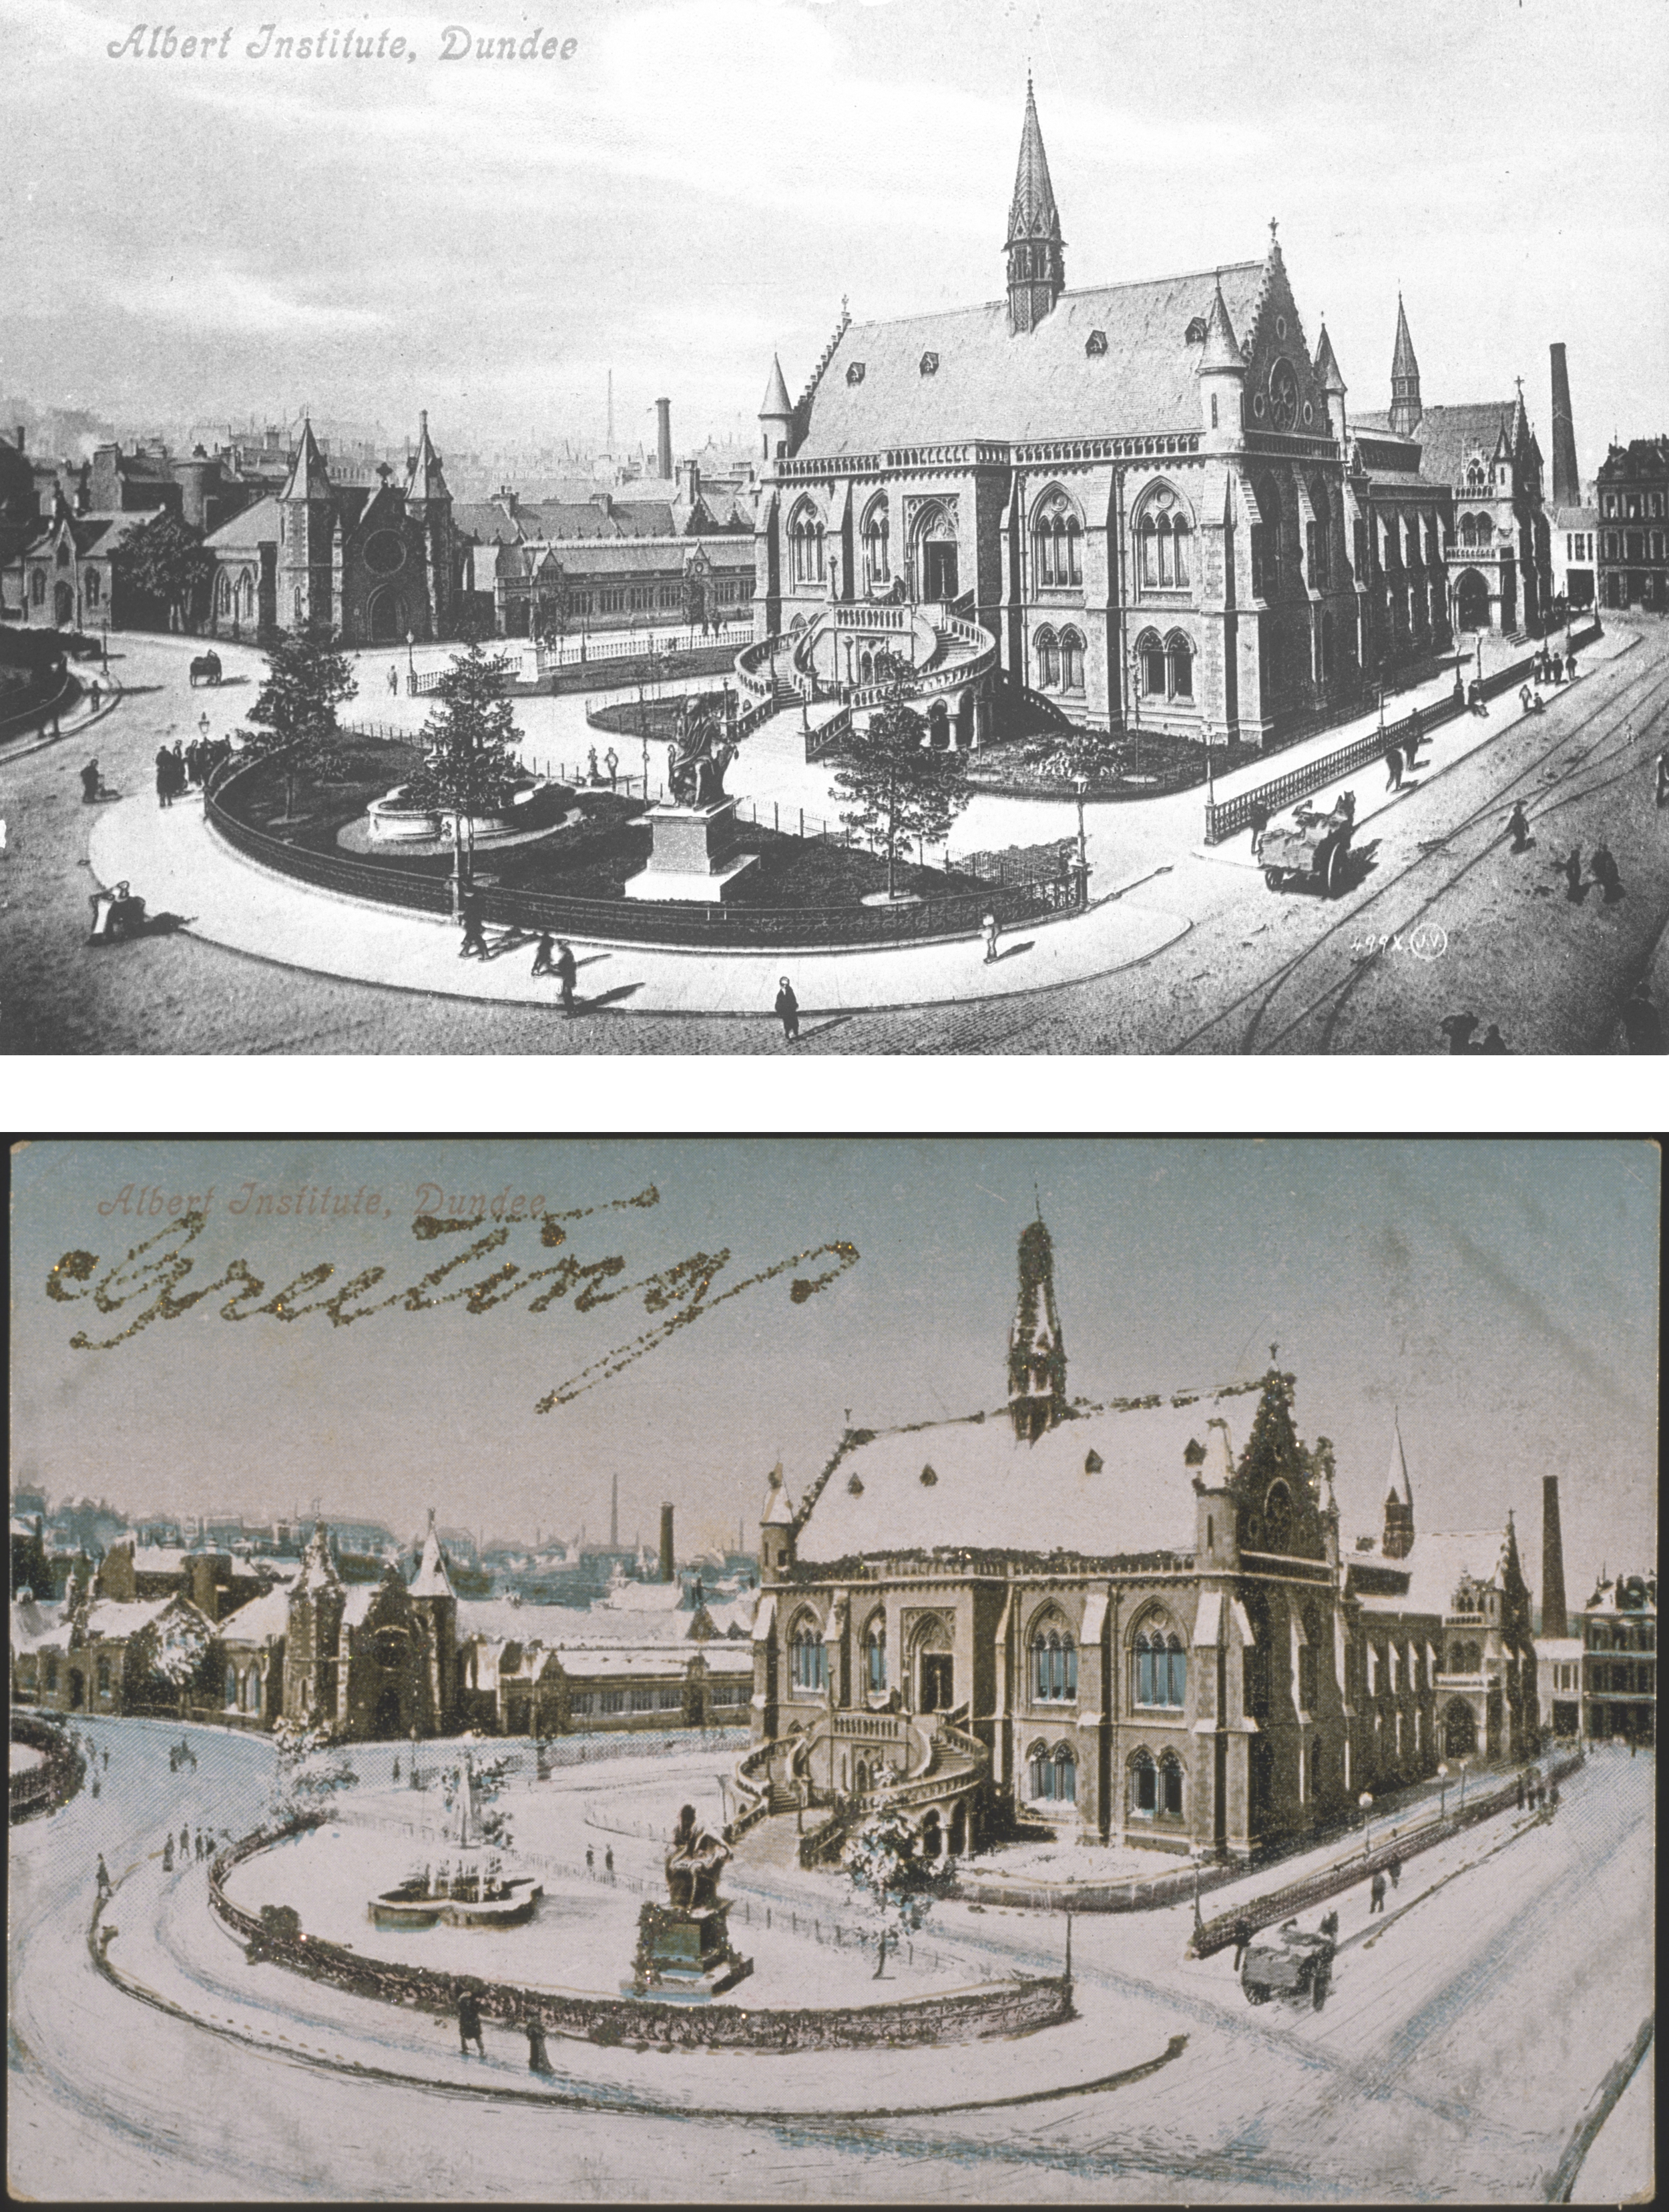 “Albert Institute, Dundee” by J. Valentine & Co., 1880 (above, St Andrews JV-499X) and “Albert Institute, Dundee” by J. Valentine & Co., 1892 (below, St Andrews JV-17199)